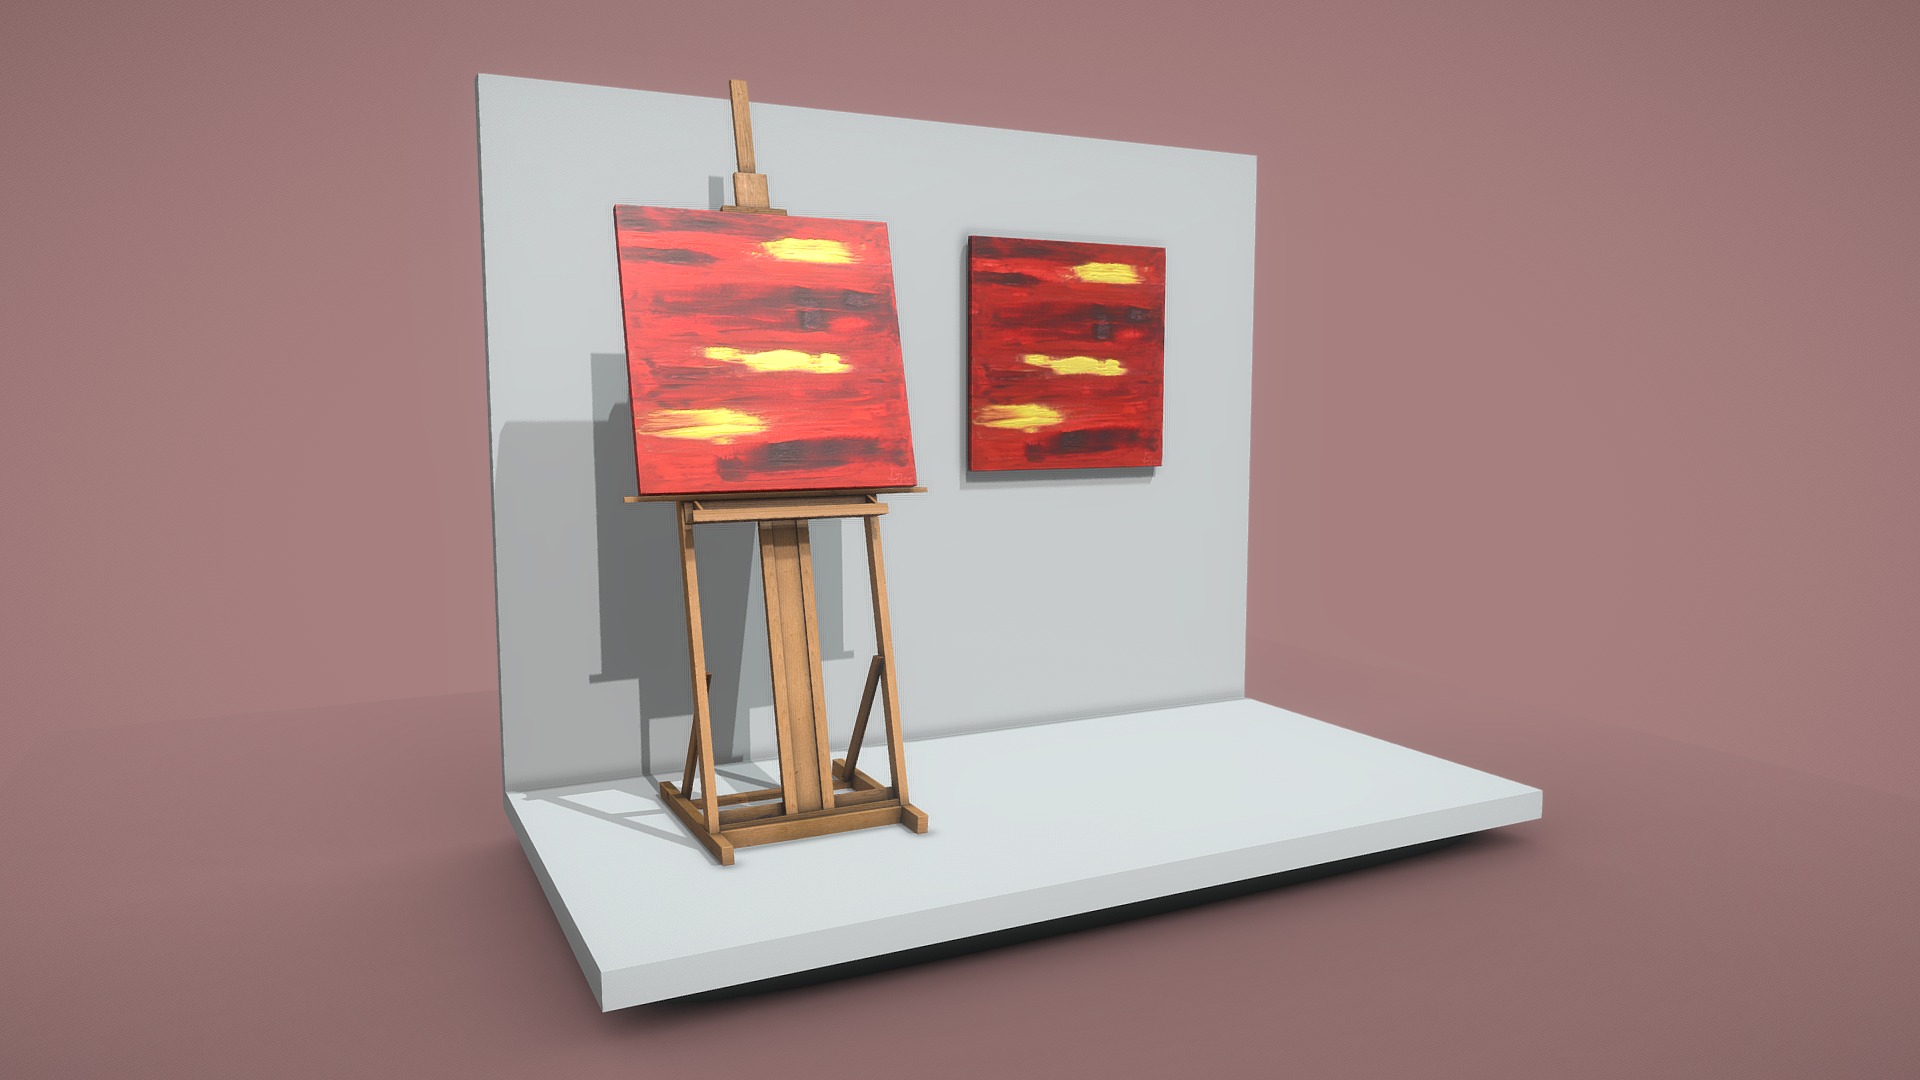 3D model Horizons – Oil Painting - This is a 3D model of the Horizons - Oil Painting. The 3D model is about a white table with a painting on it.